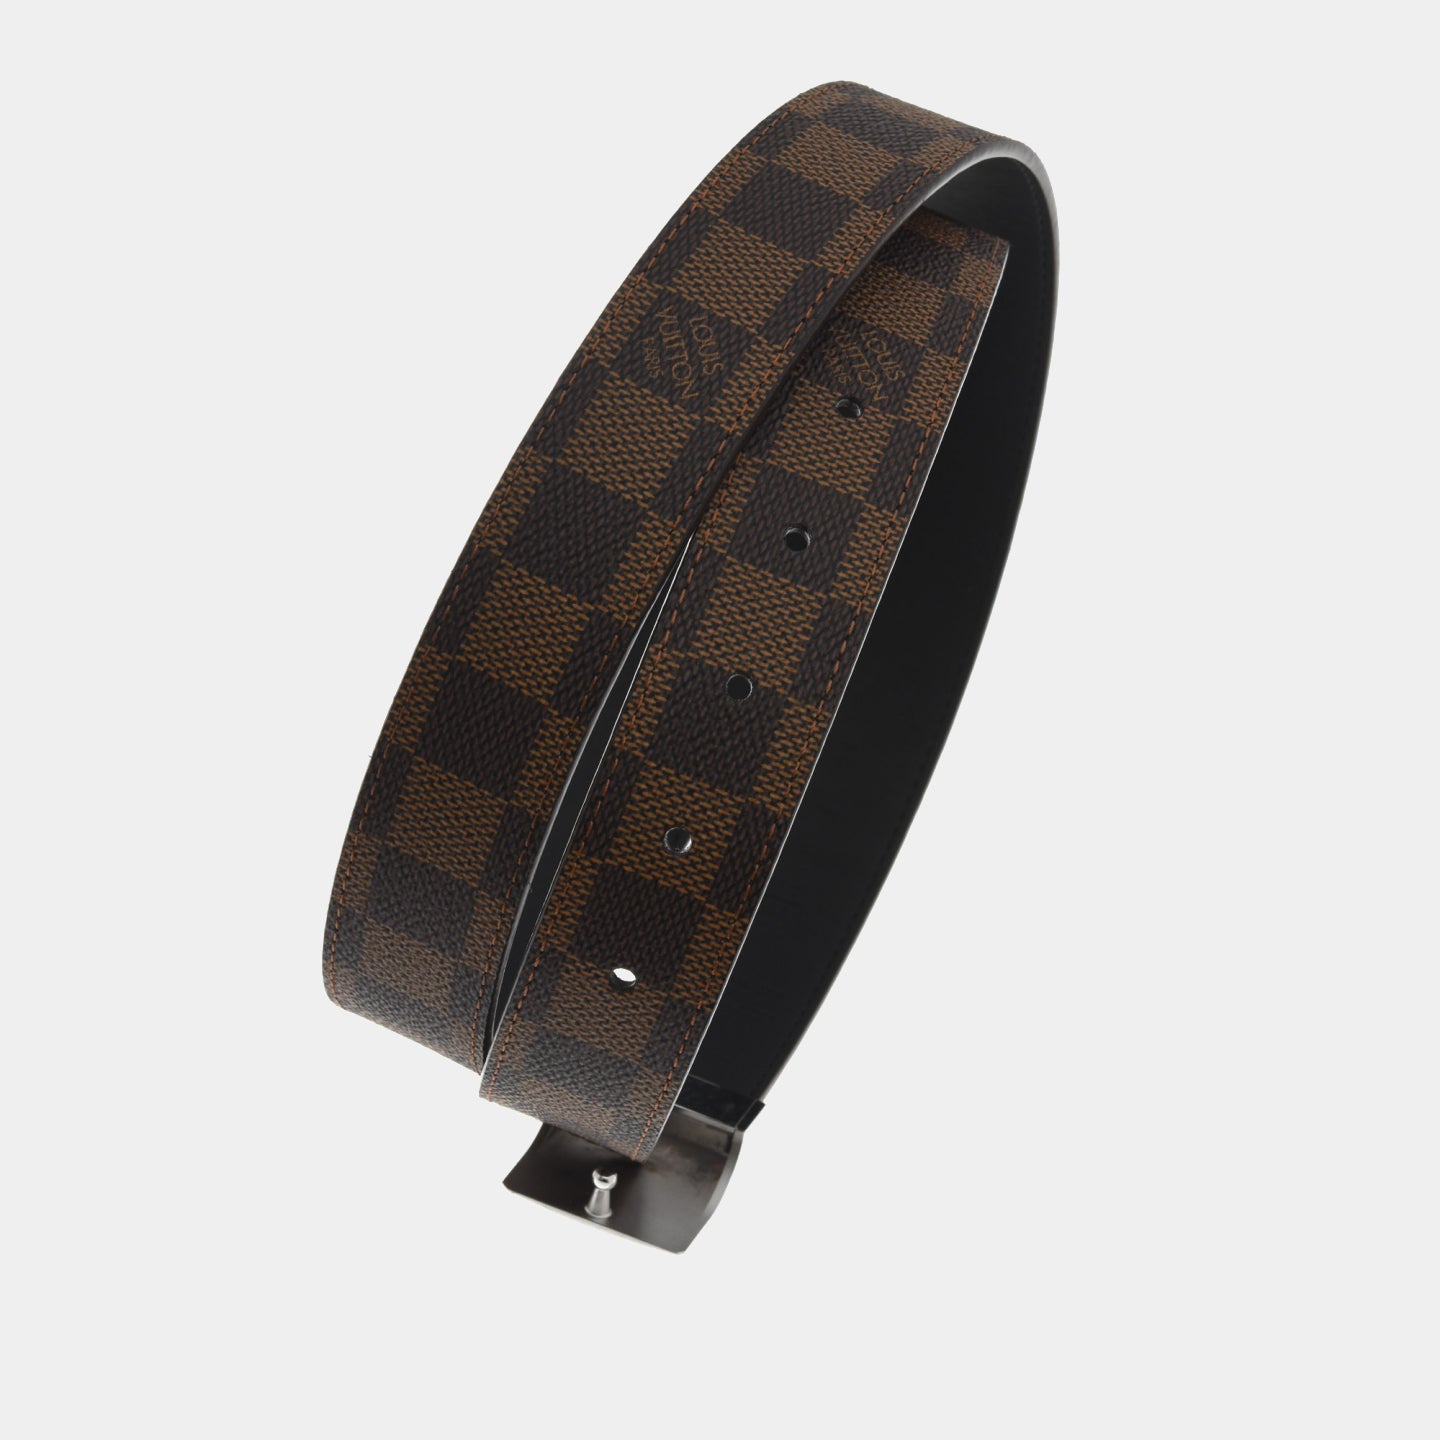 Louis Vuitton Belt in Grey, Lord & Taylor